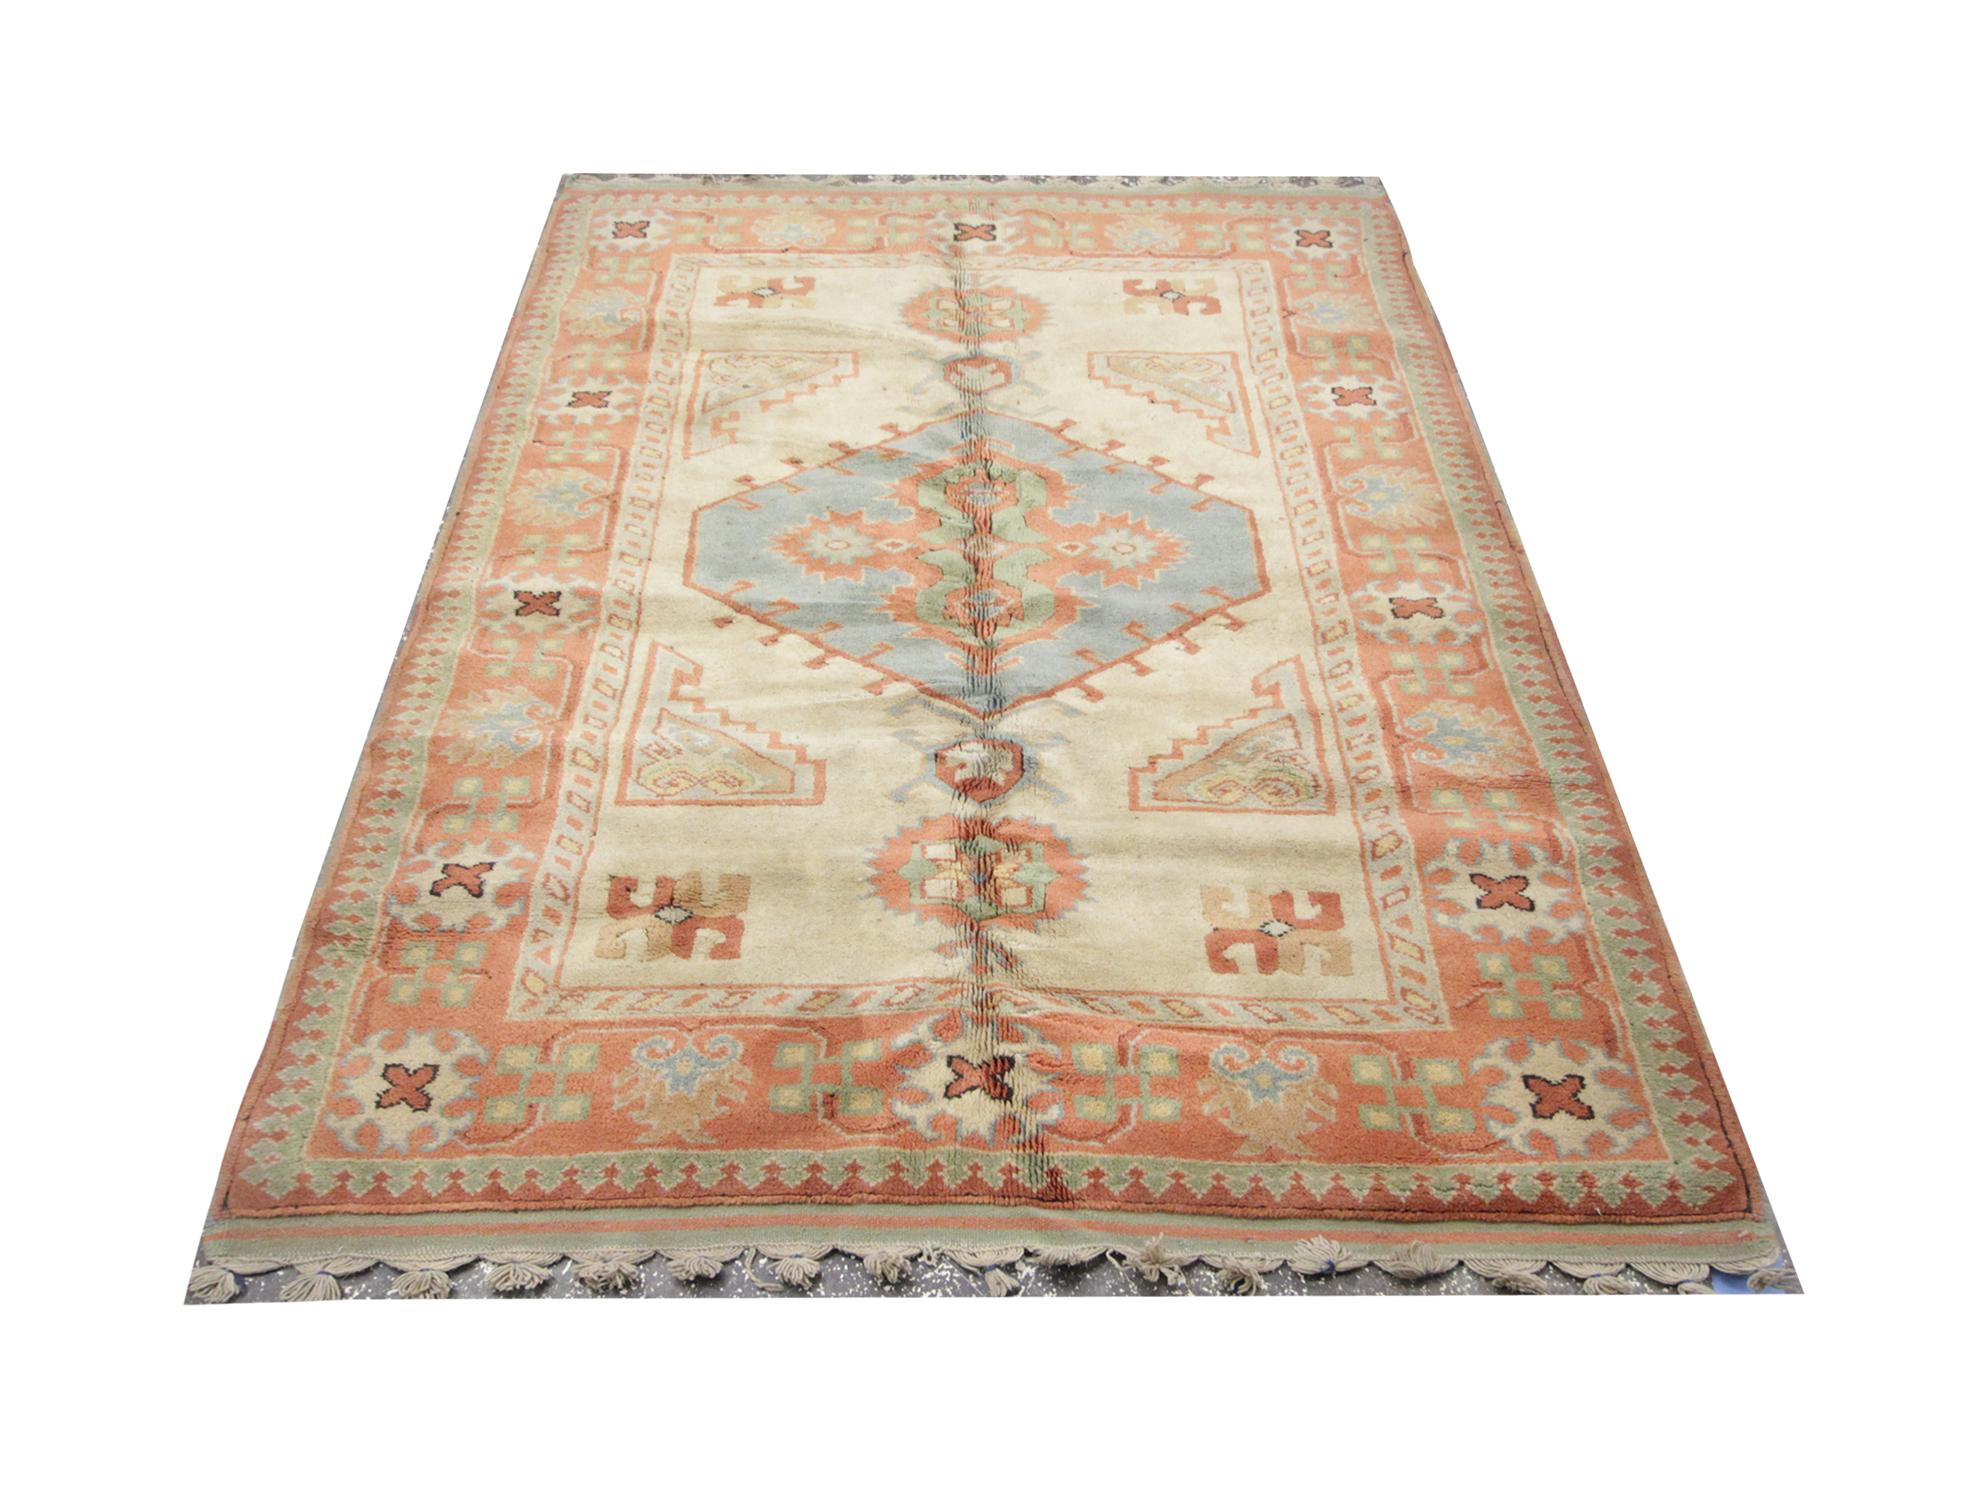 Pastel colorways cover this hand knotted vintage rug. Featuring a central medallion in the central design on a beige background. This is then enclosed by a highly-detailed orange and green border. This high-quality Turkish rug is perfect for both